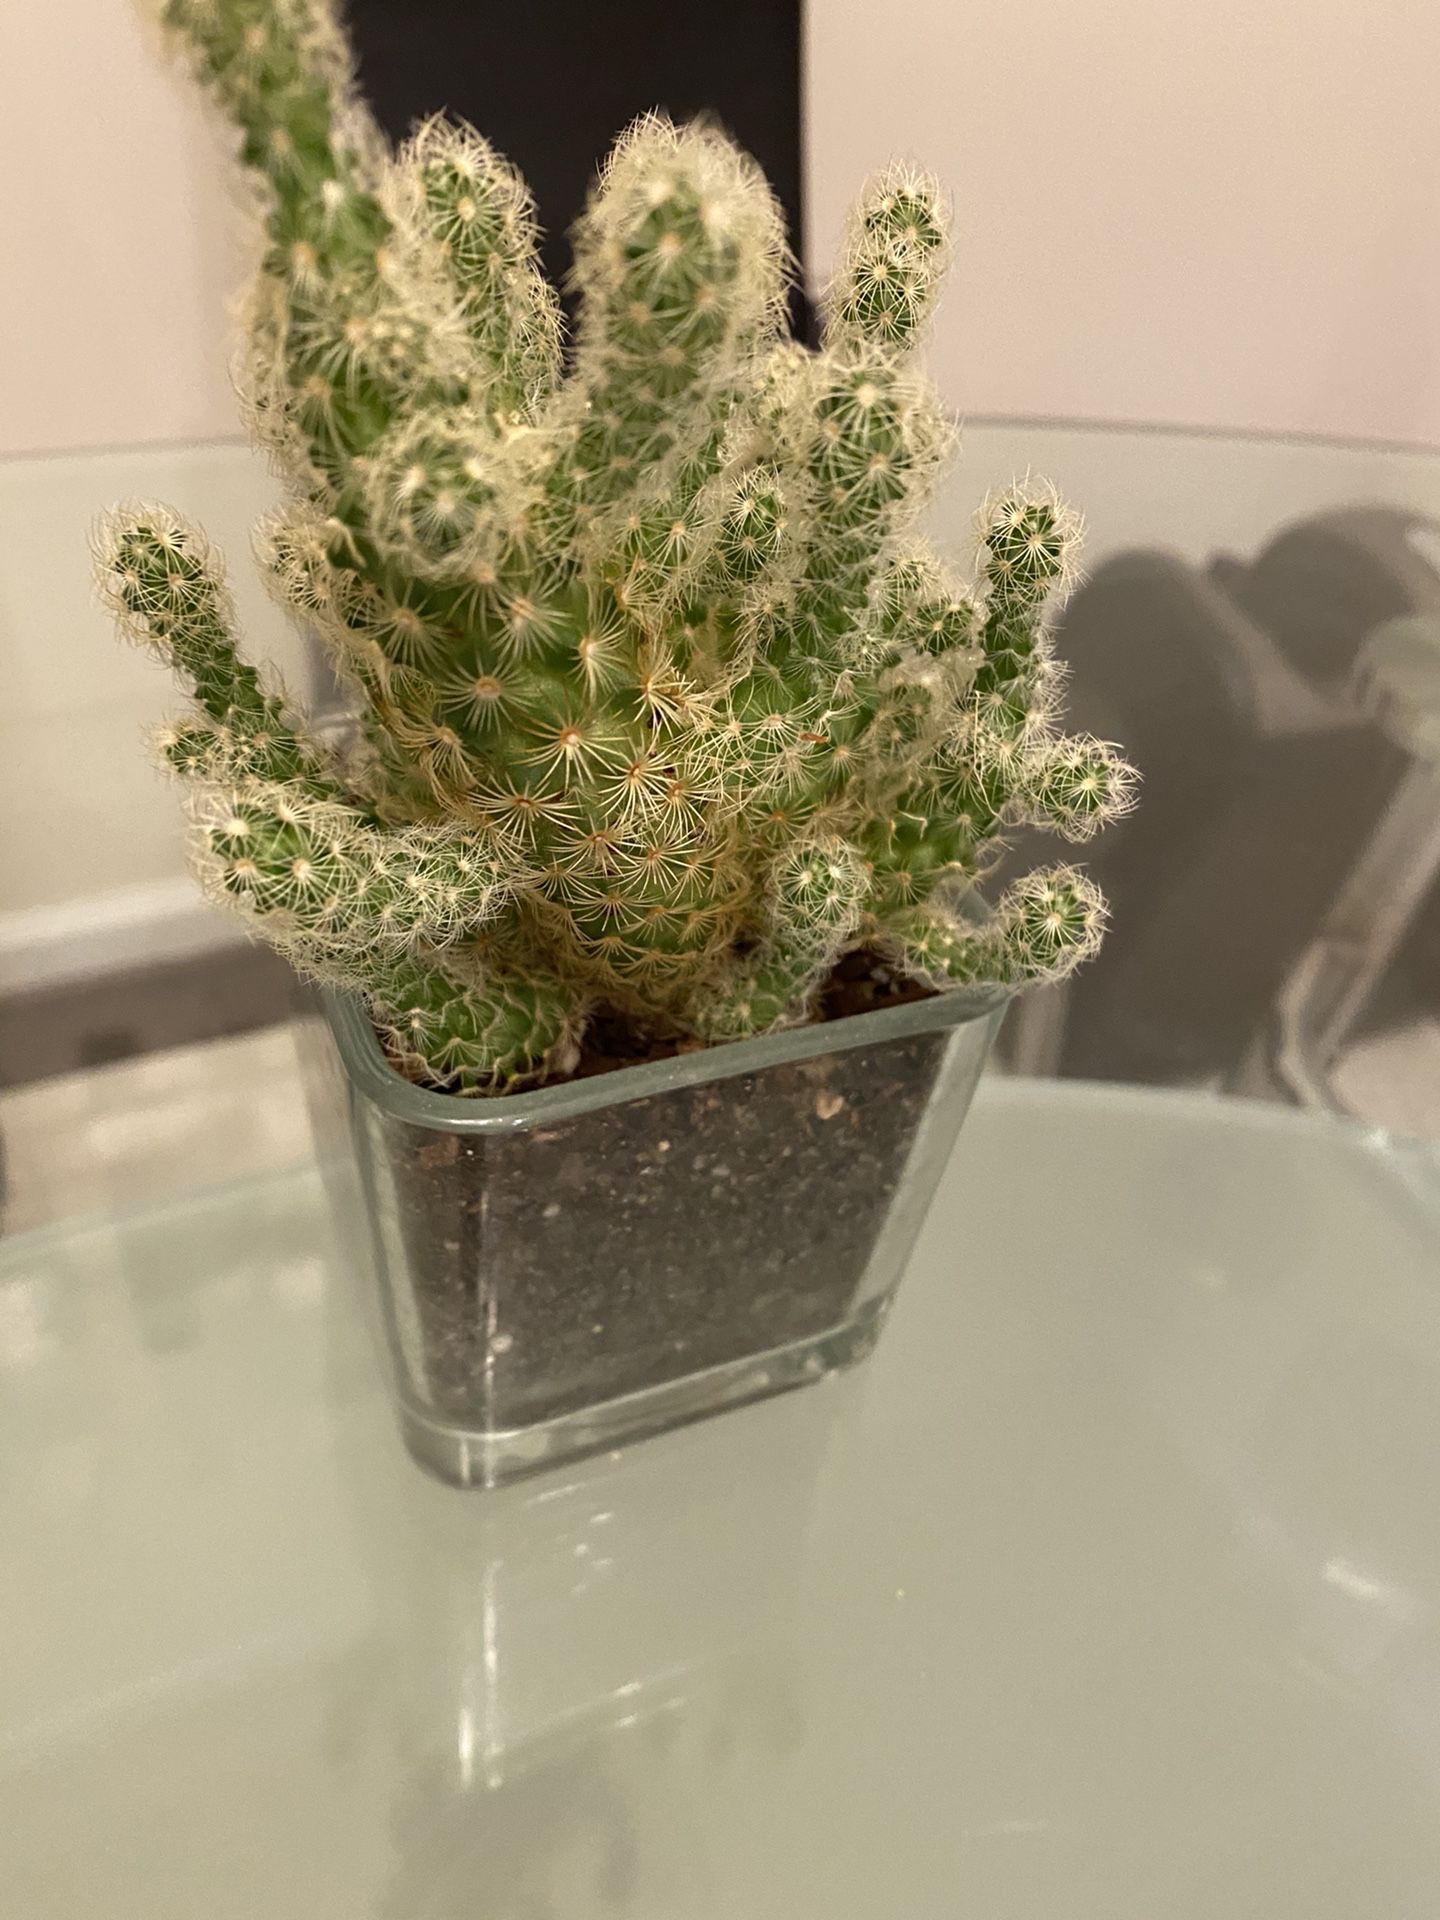 3 years old healthy cactus (small )- around 6 inches